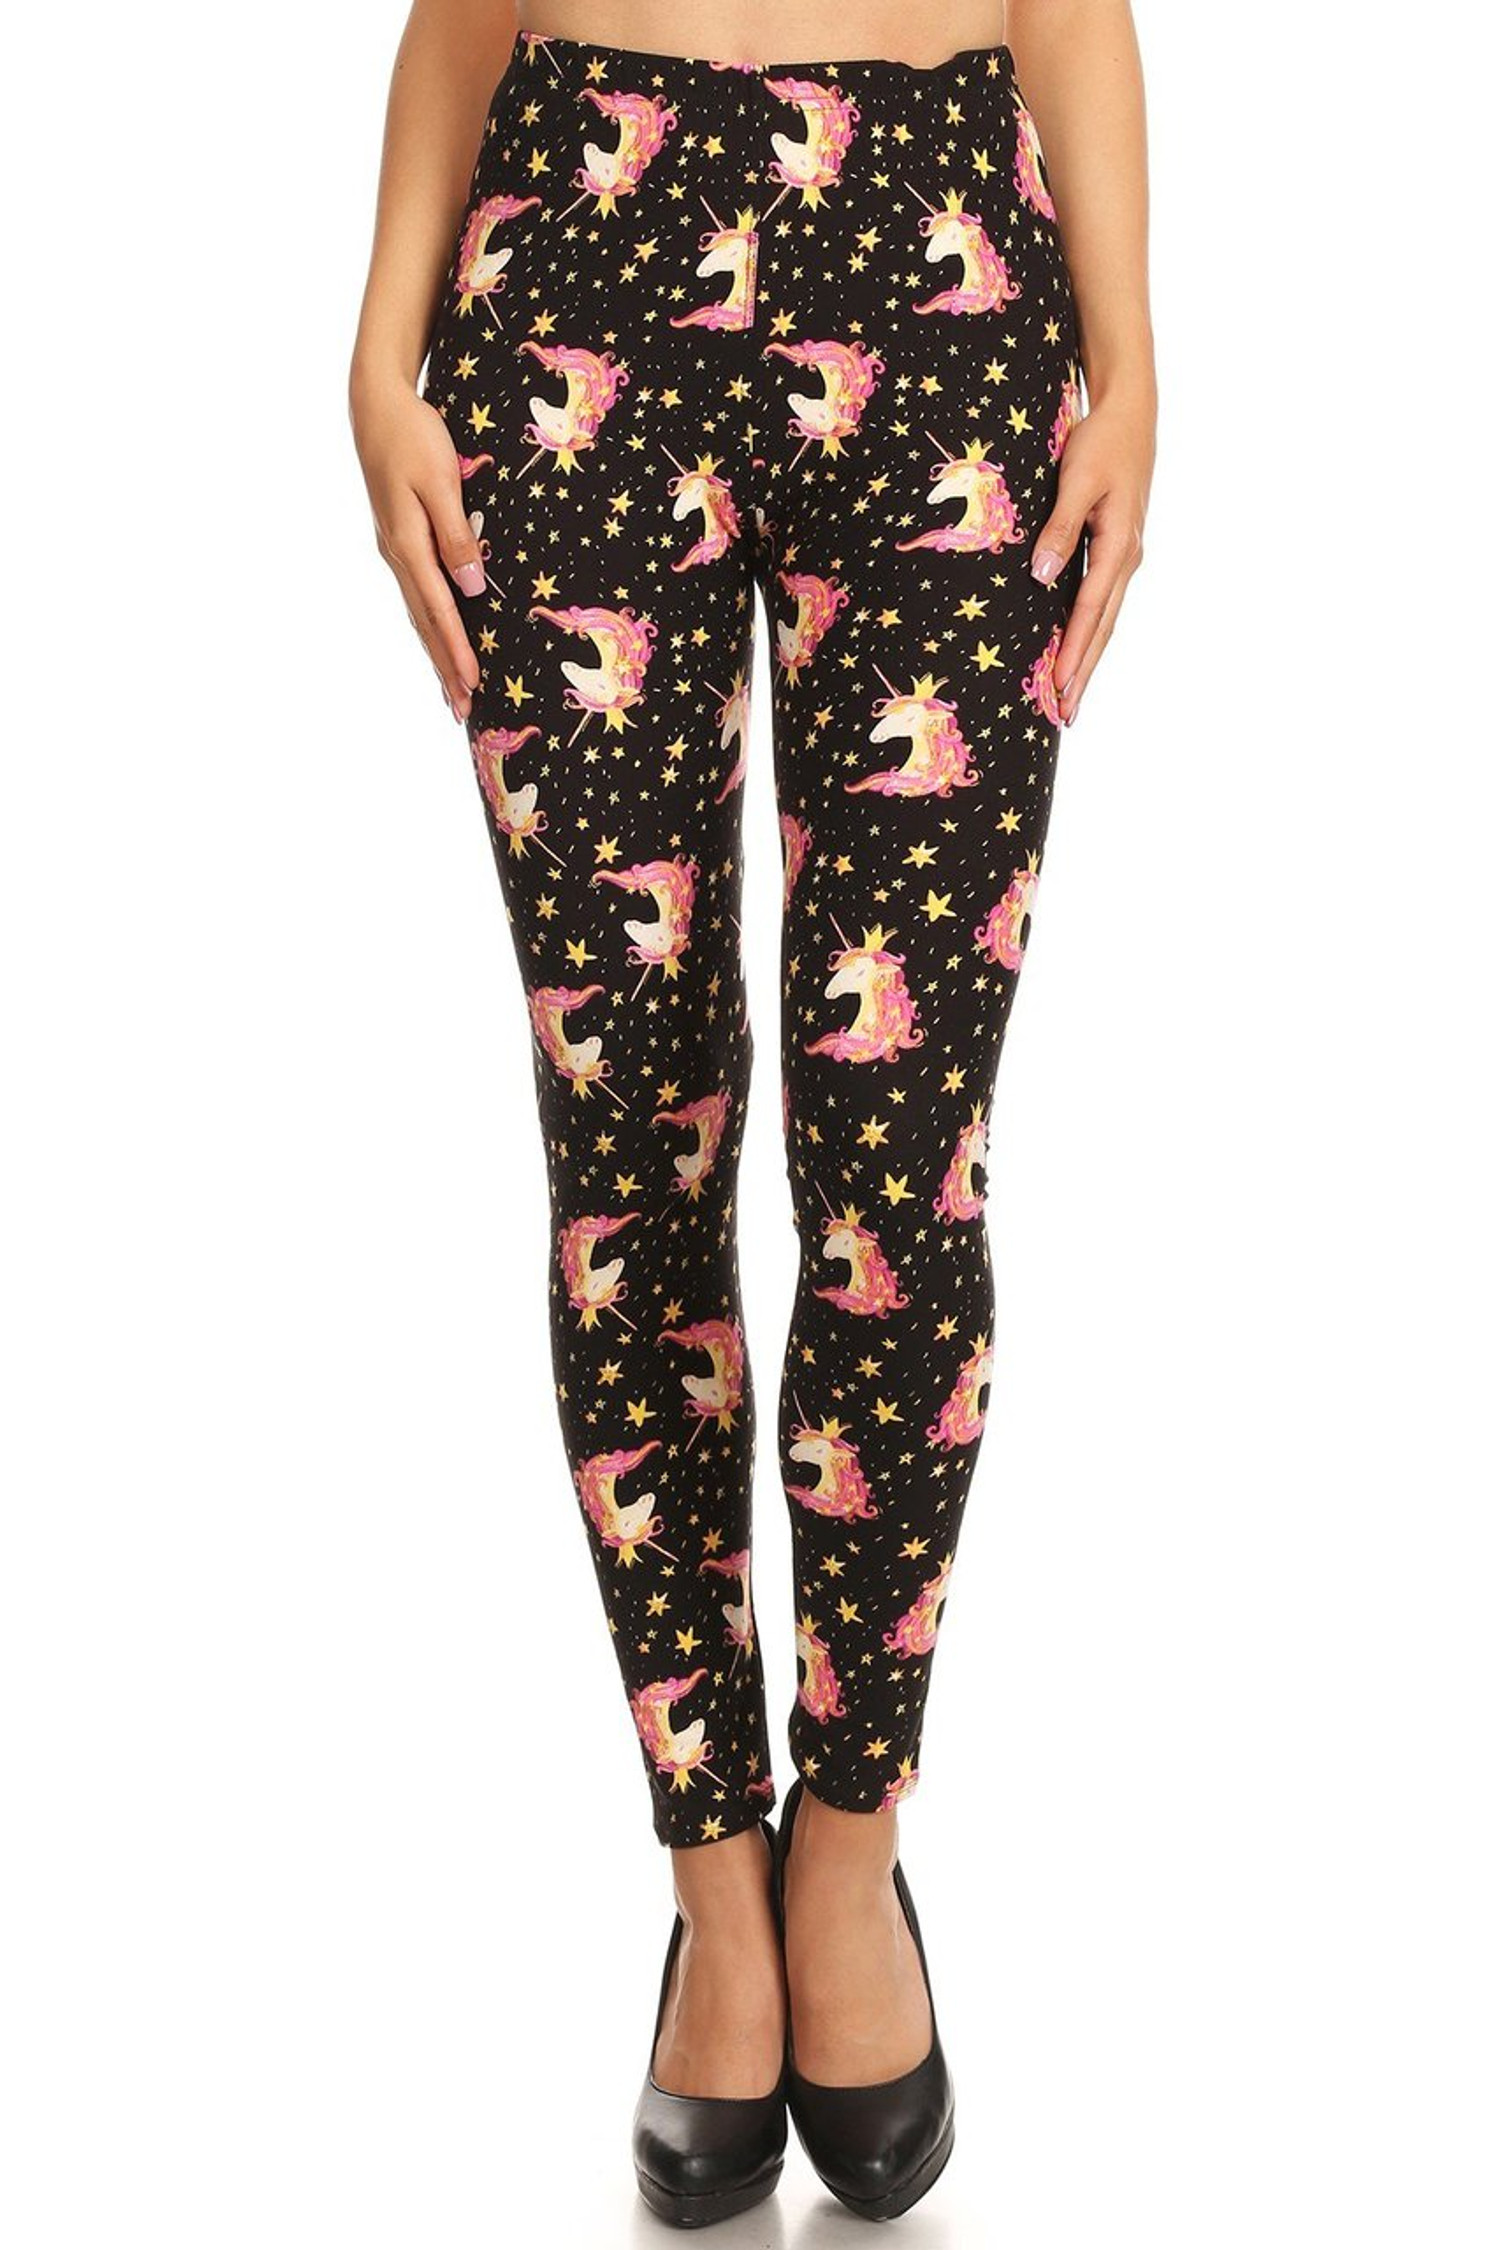 Buttery Smooth Twinkle Unicorn Extra Plus Size Leggings - 3X-5X